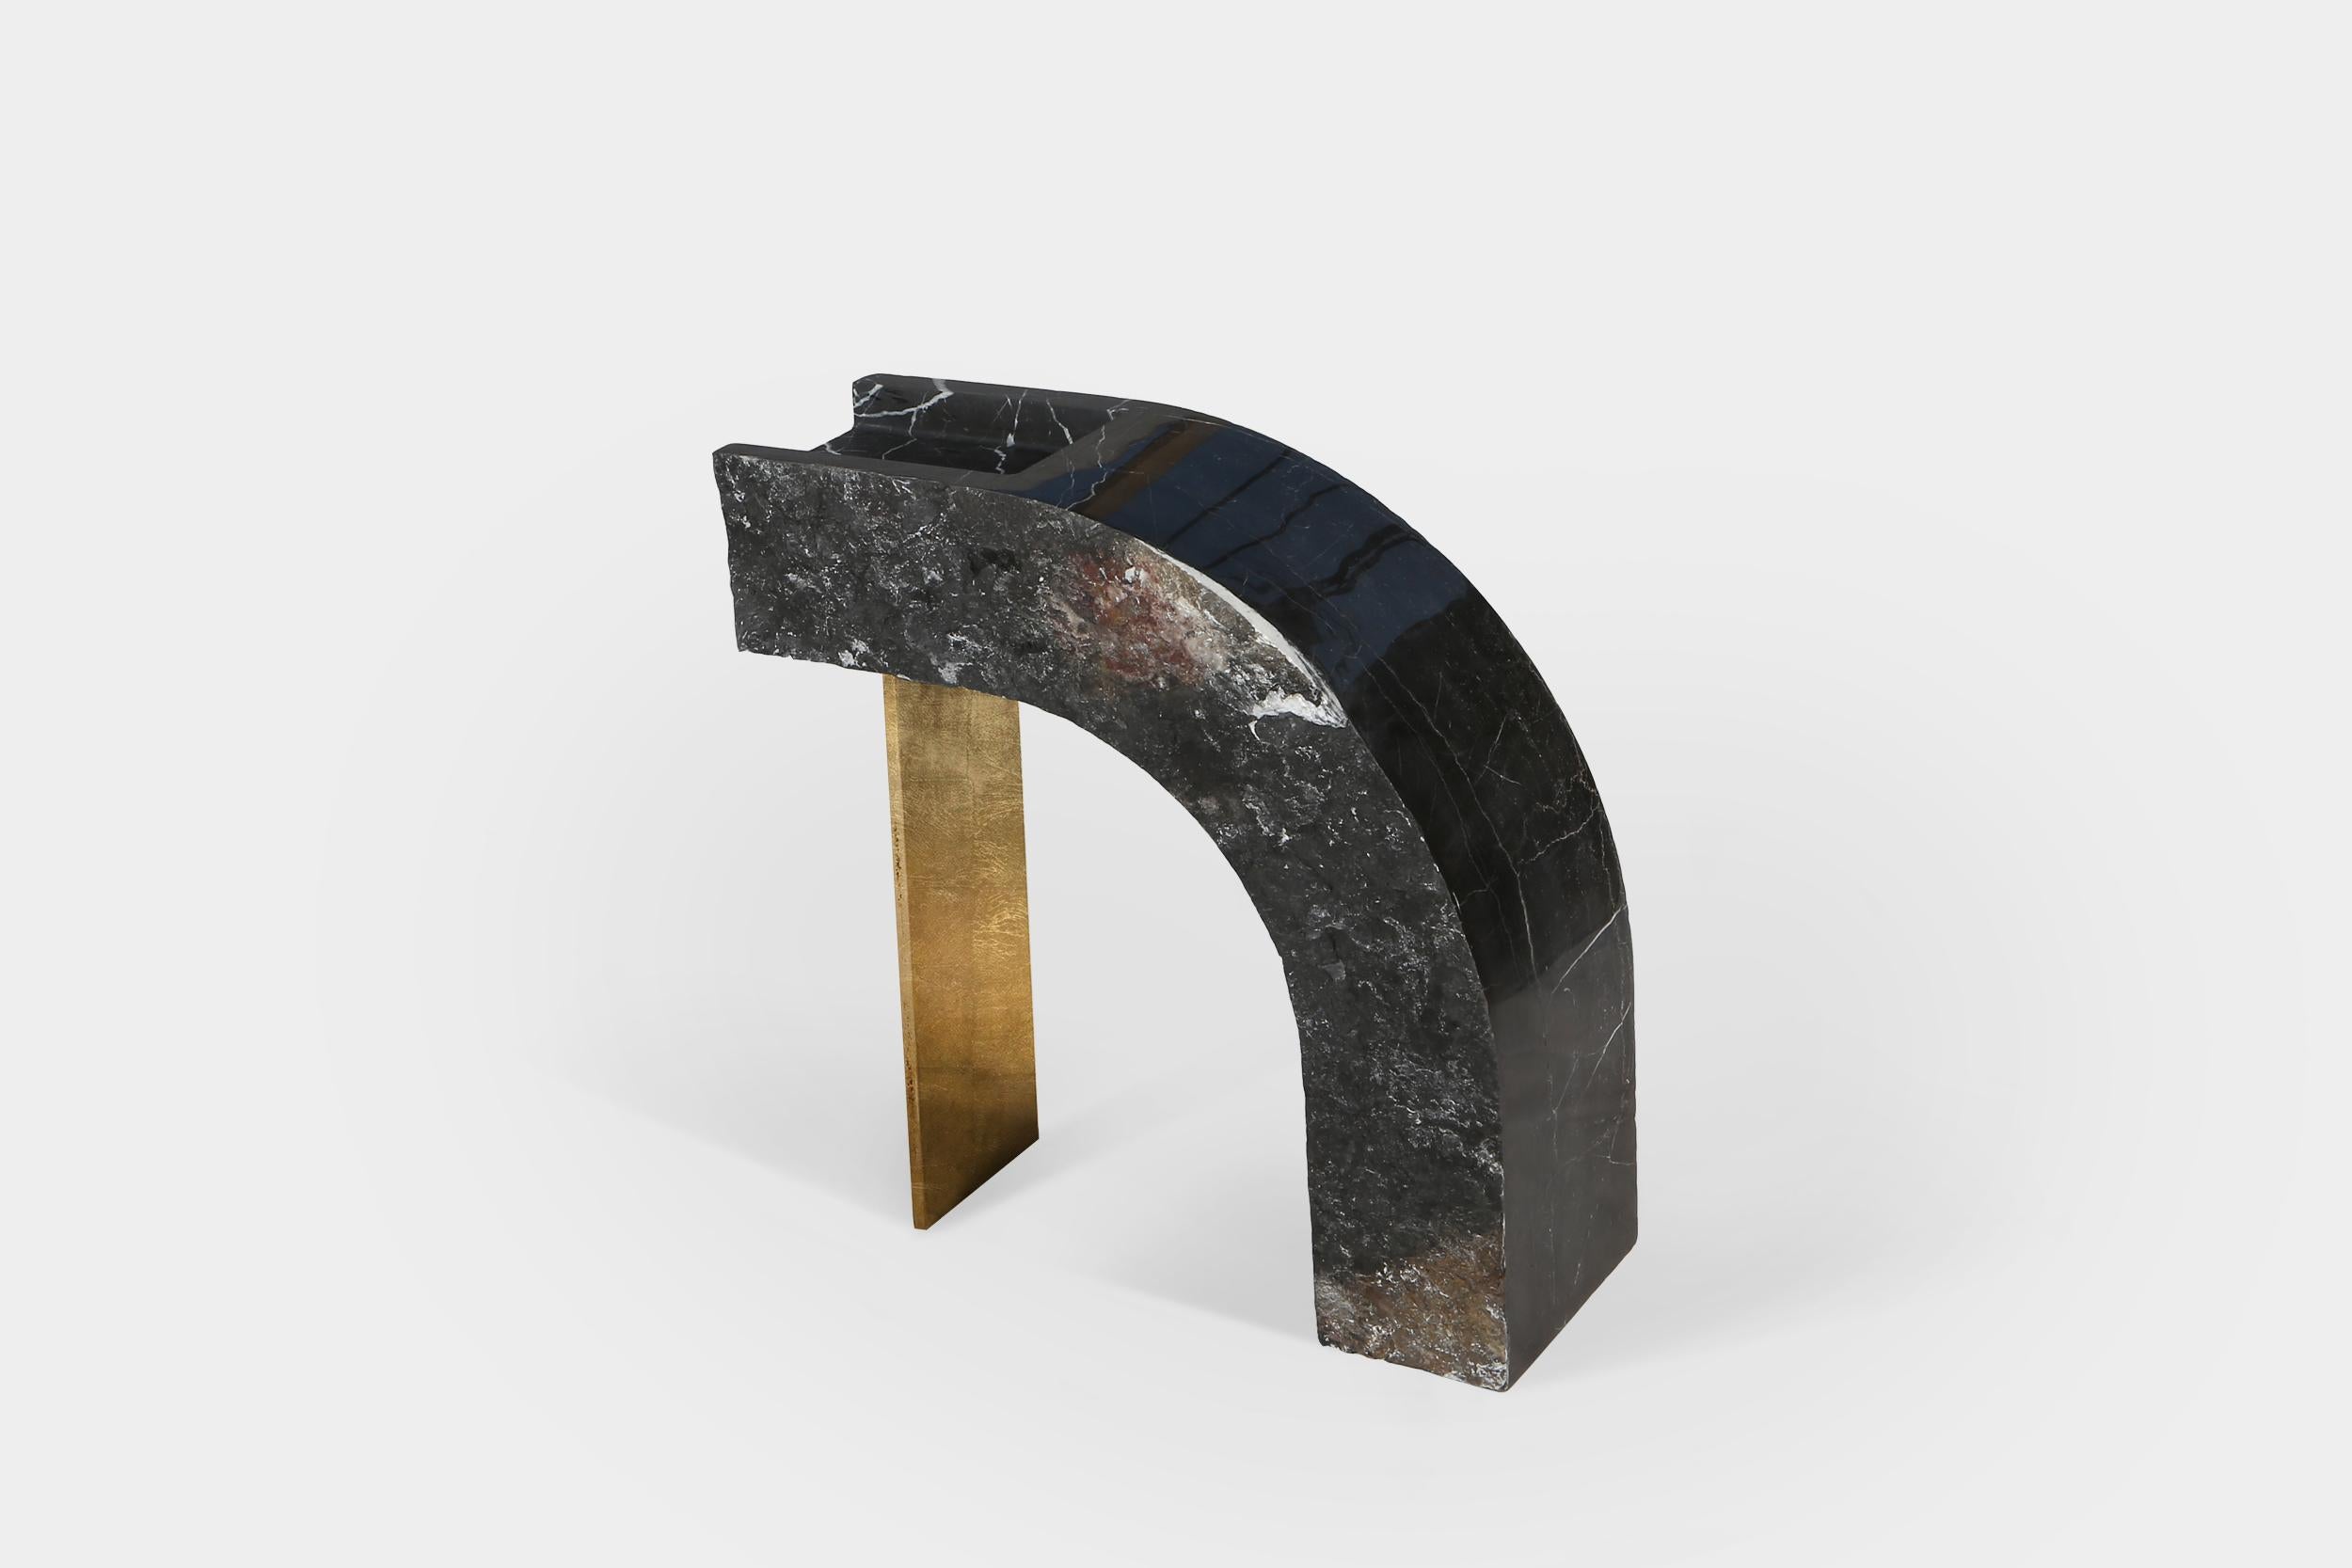 Found II side table No.6 by A Space
Dimensions: D 48 x W 25 x H 51cm
Materials: Marble, steel, gold leaf.

Spontaneity, environmental awareness and the primeval nature of the materials are central themes explored in this collection, which